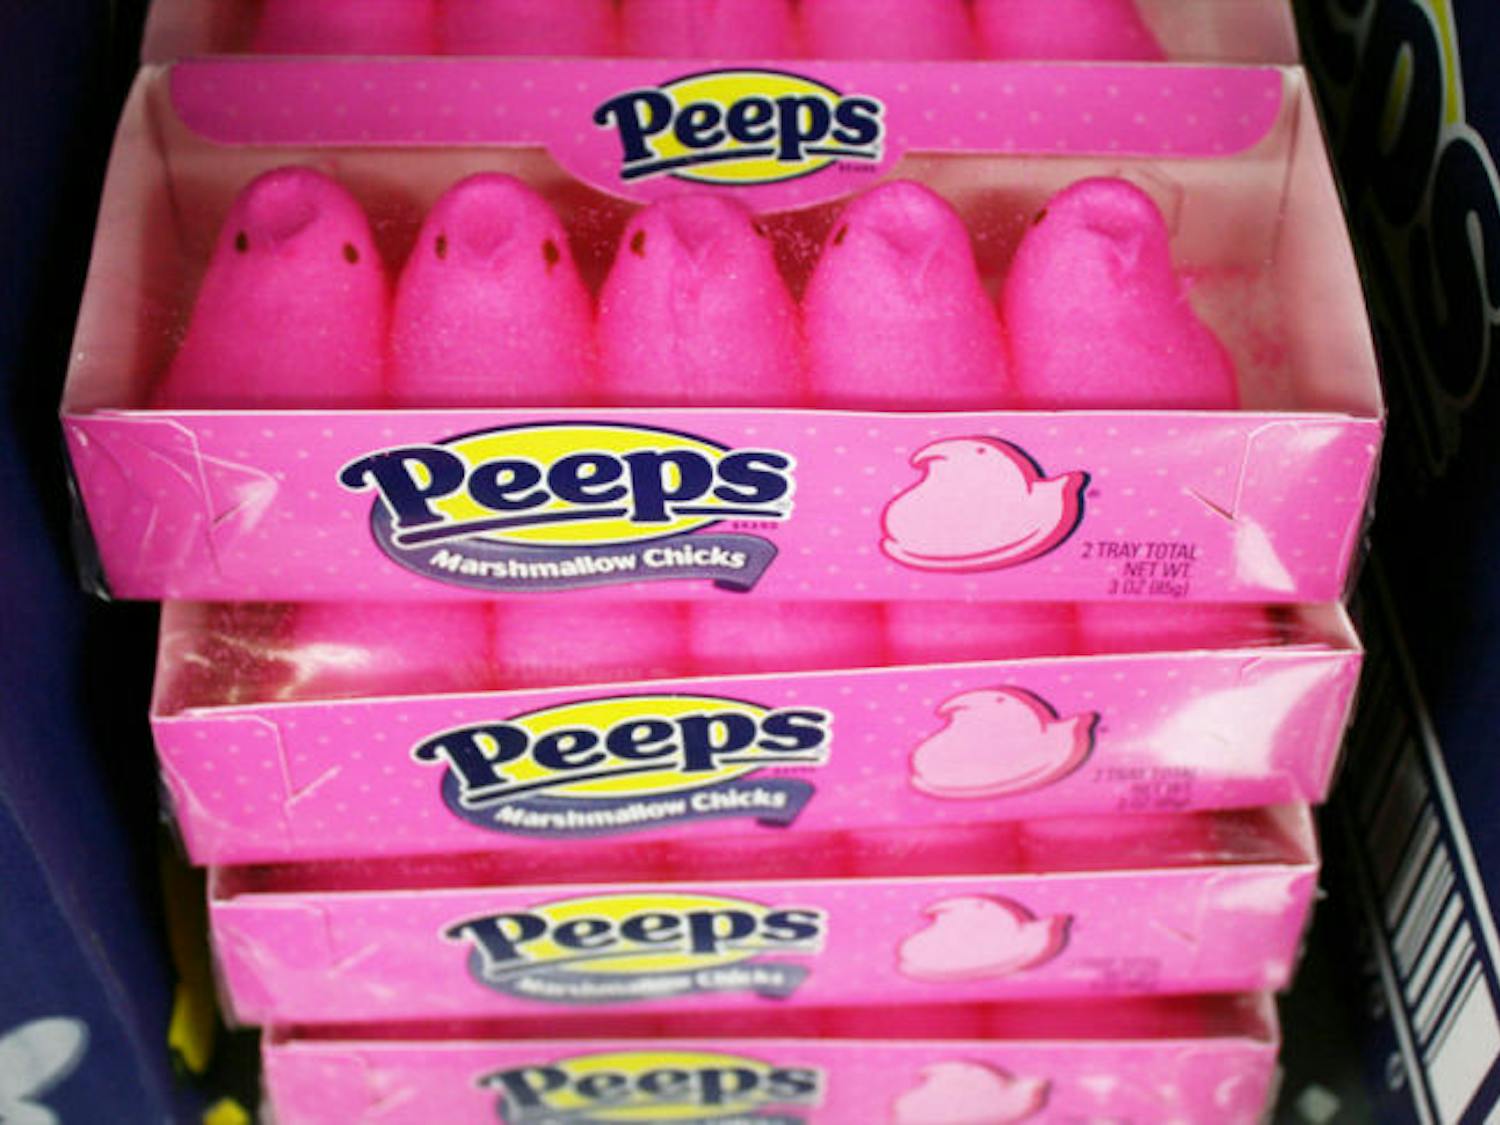 To celebrate Peeps’ 60th anniversary, the company will be running its first TV ad in more than 10 years. The rebranding campaign may encounter issues because of society’s focus on health, a UF expert said.